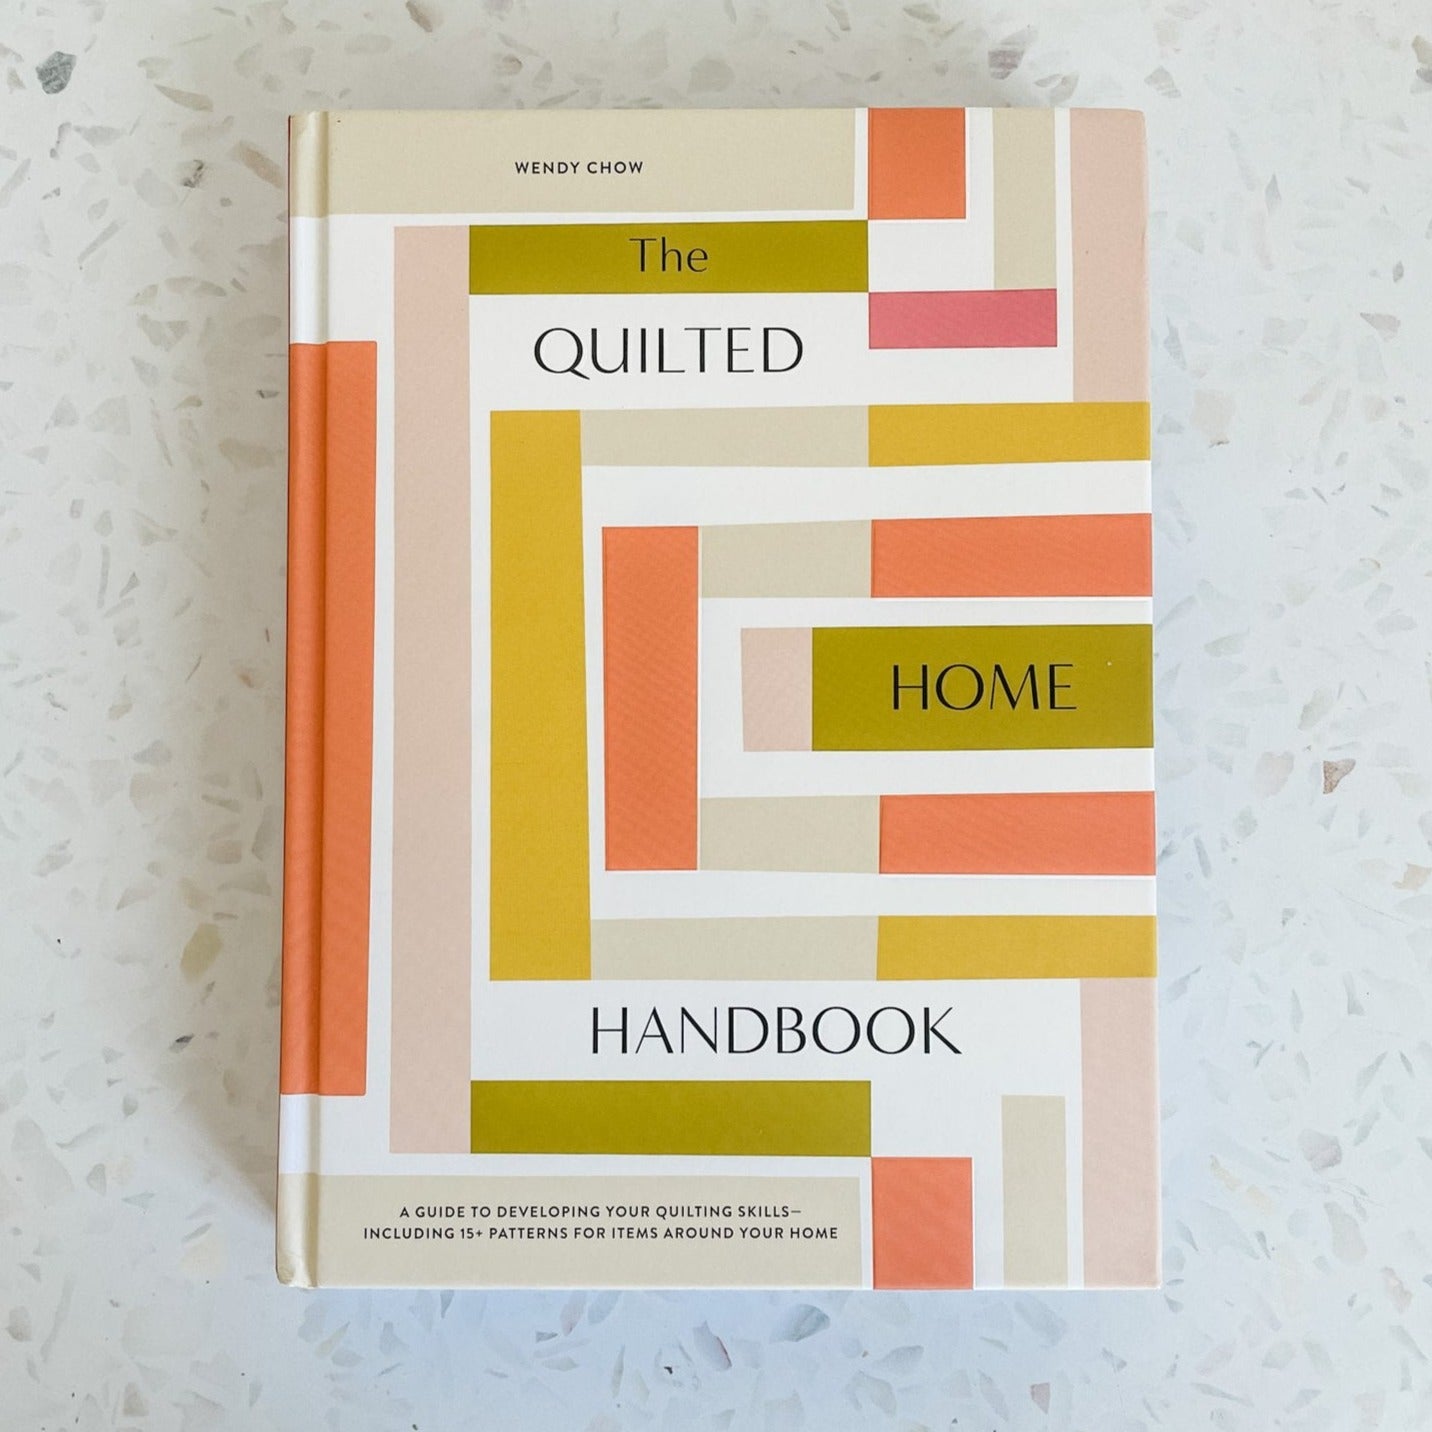 The Quilted Home Handbook | Wendy Chow